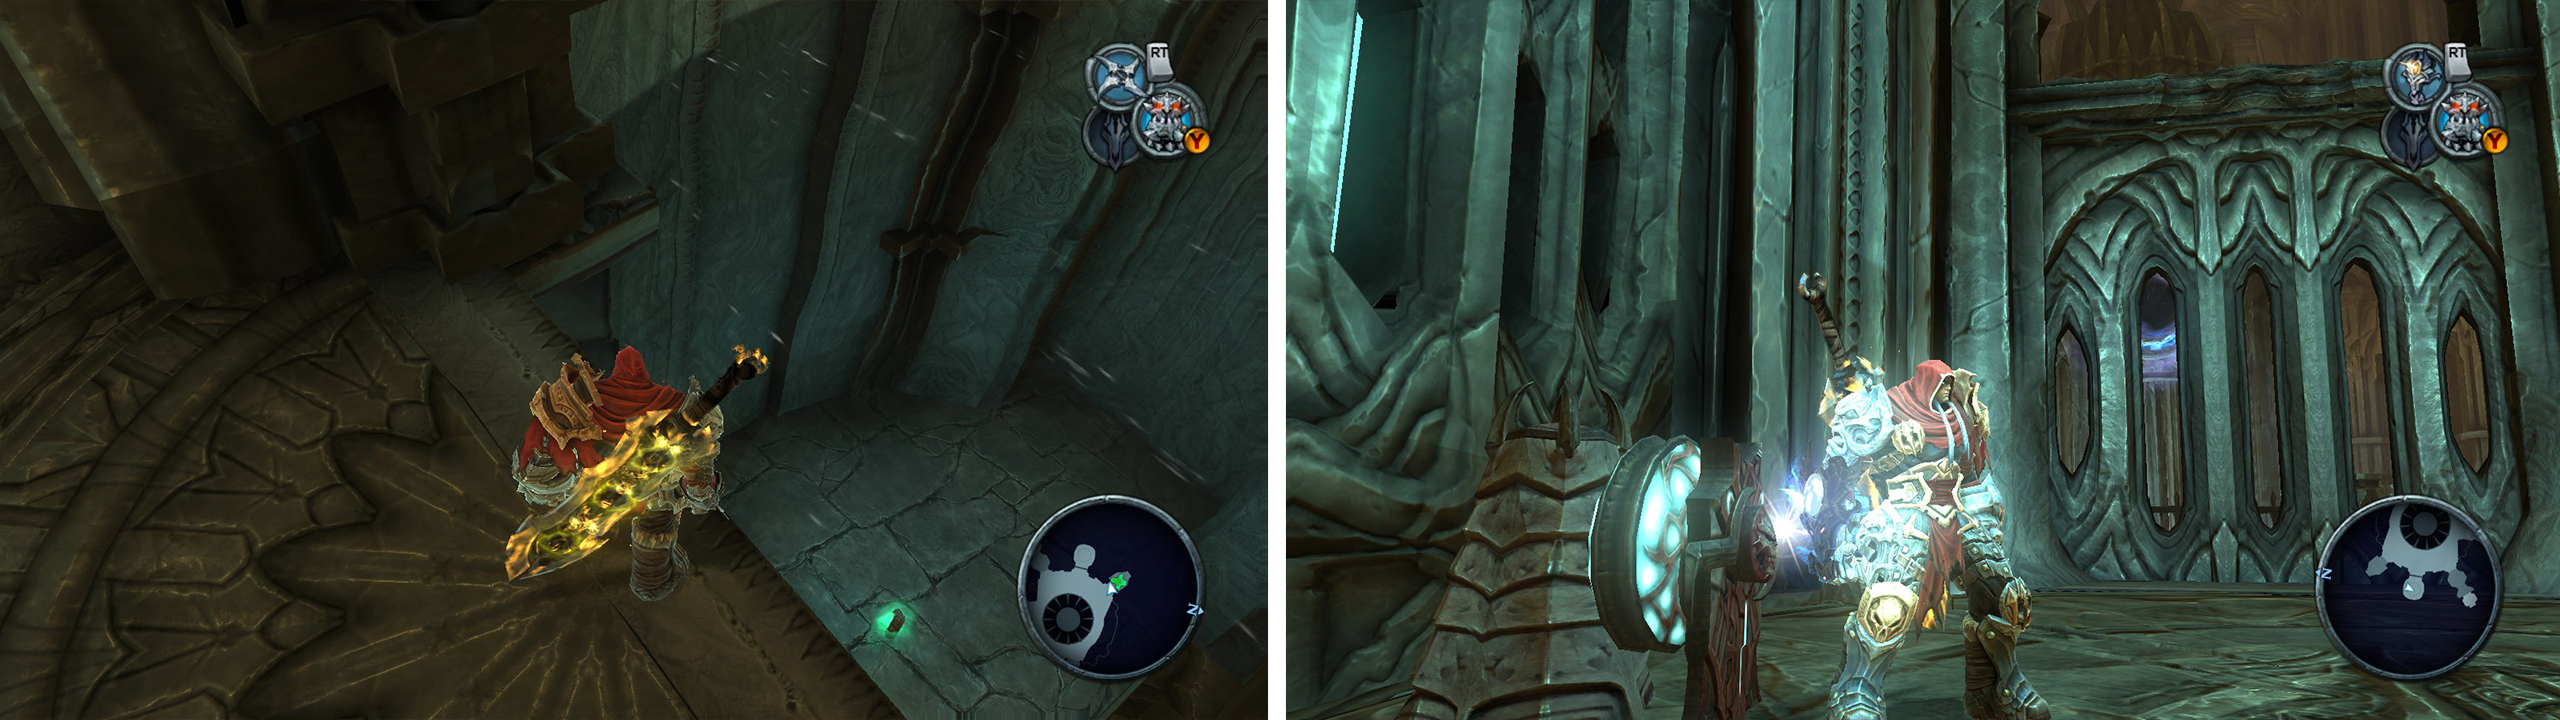 Look in the pool of water for an Artefact (left). use the portal in the centre of the room to jump the fence (right).